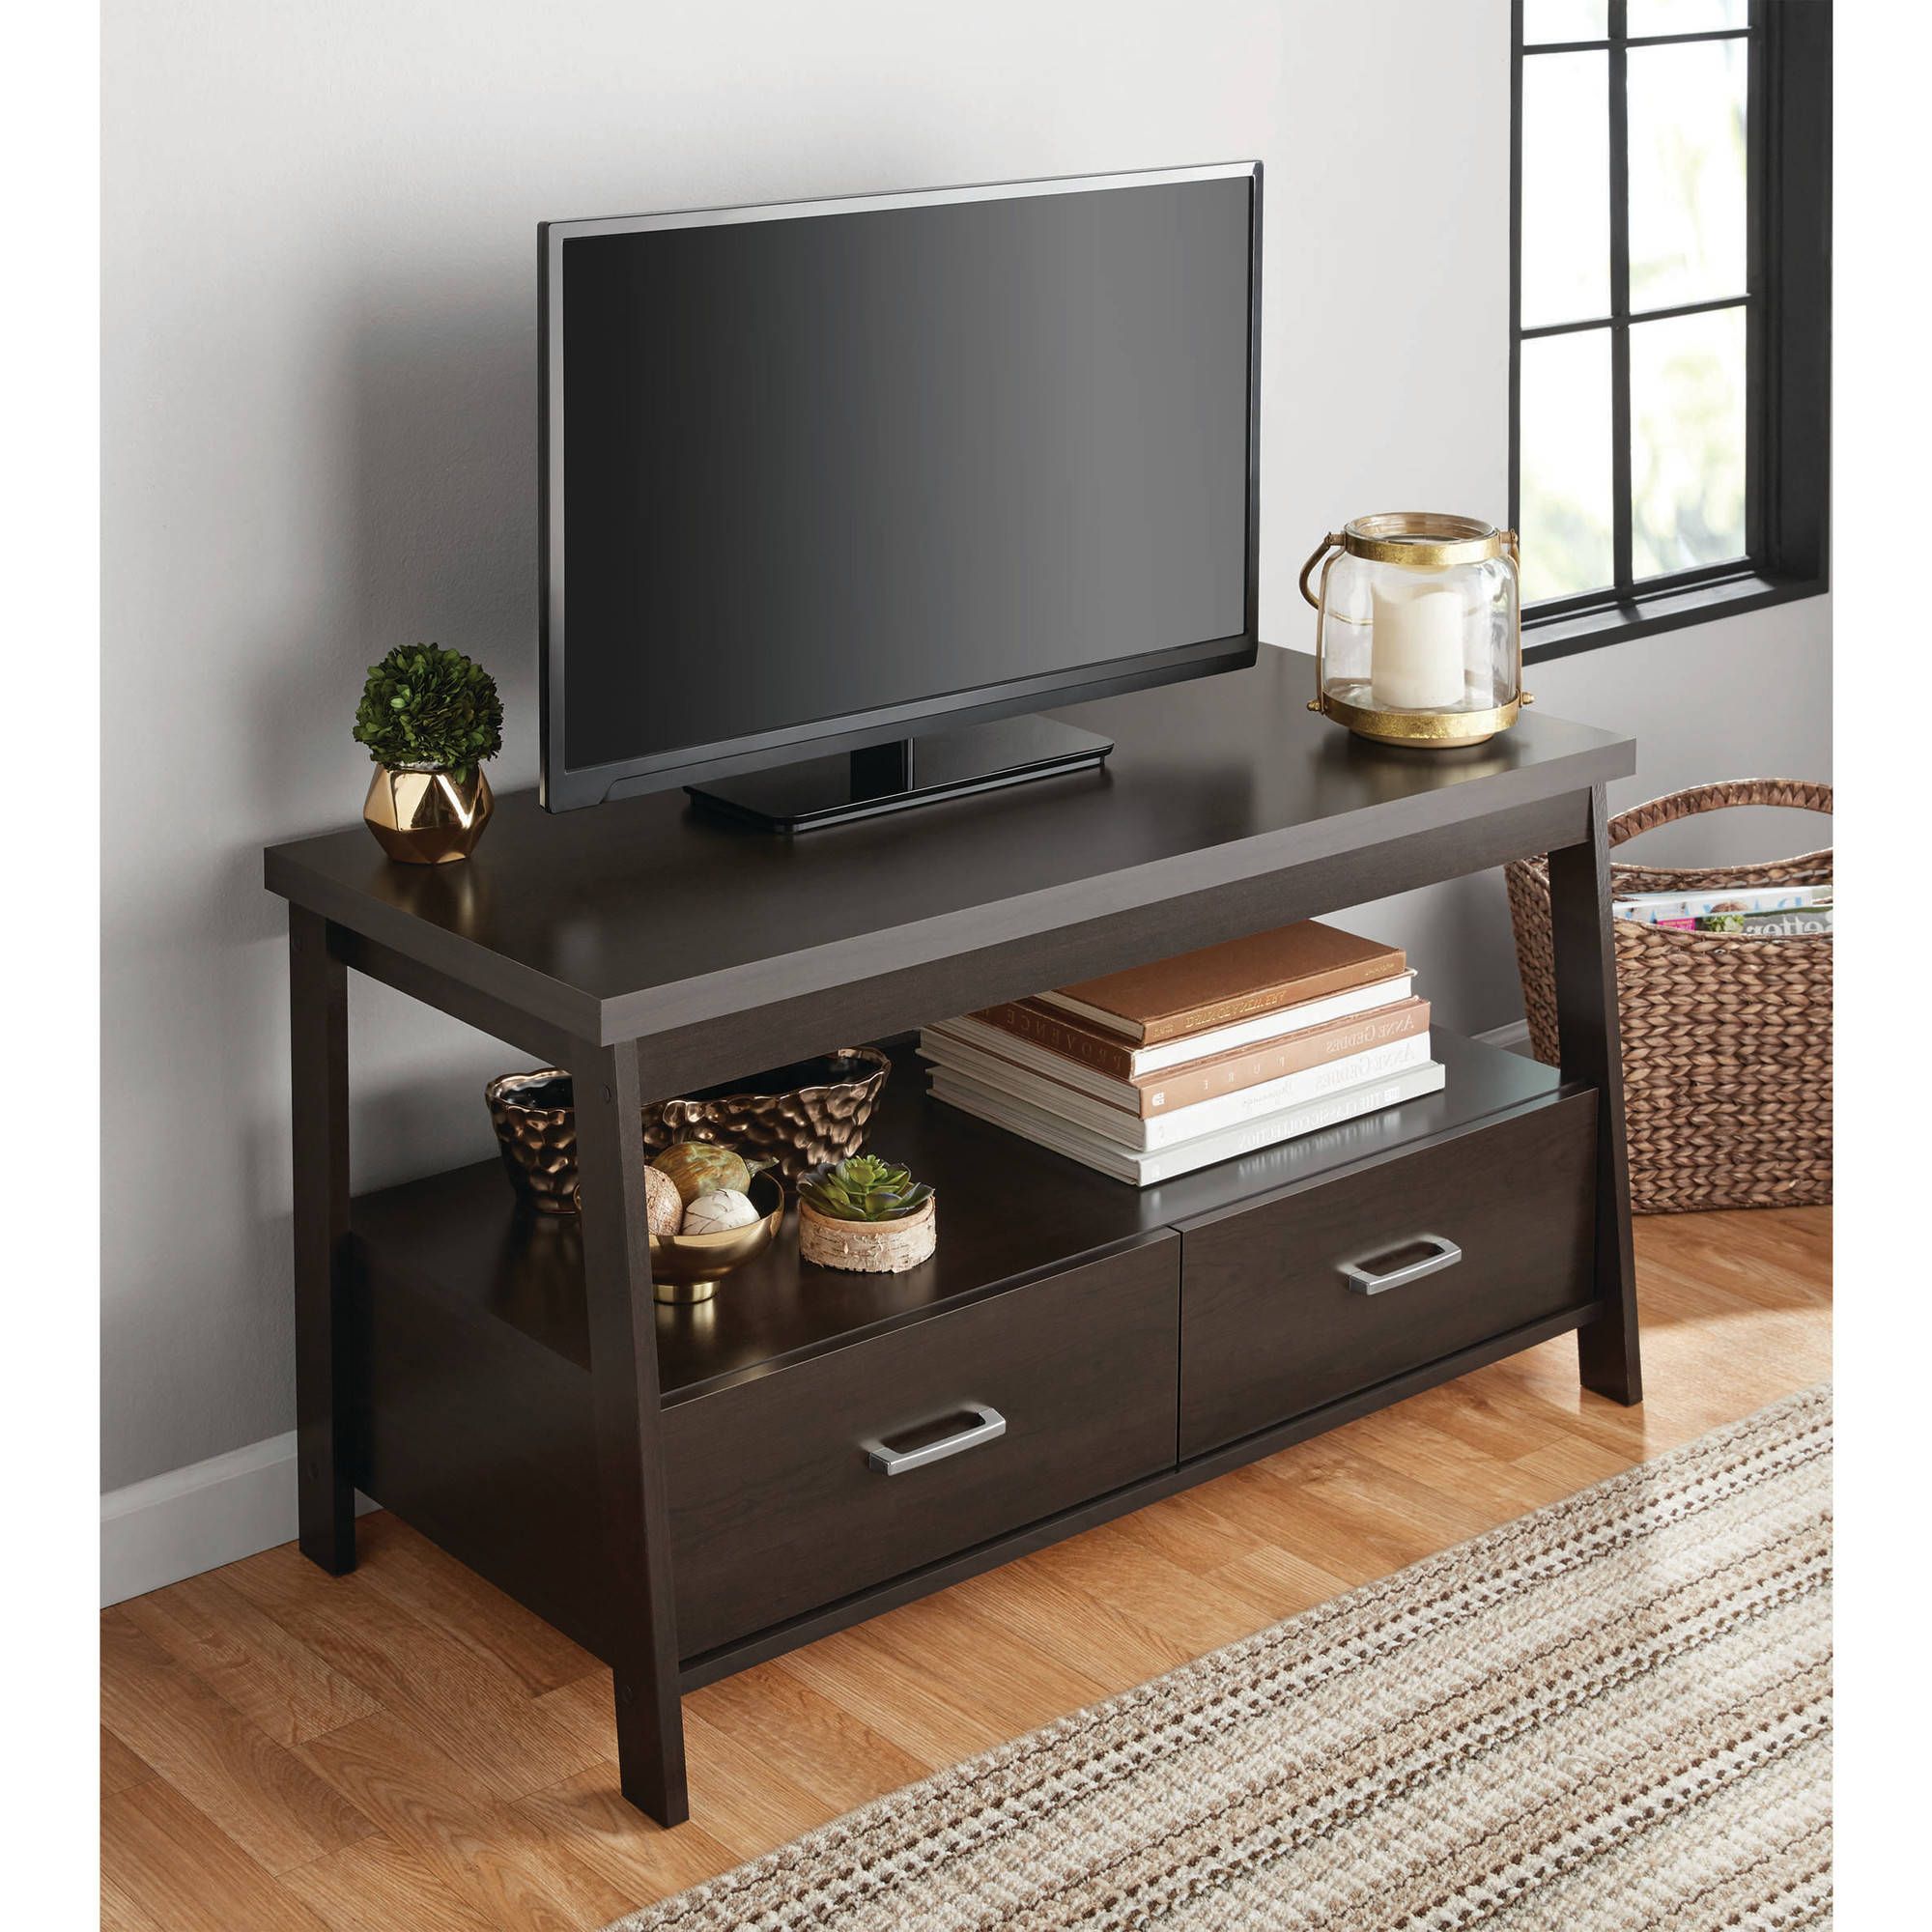 47" Wooden Expresso Tv Stand Logan Entertainment Center Drawers Inside Latest Expresso Tv Stands (View 19 of 20)